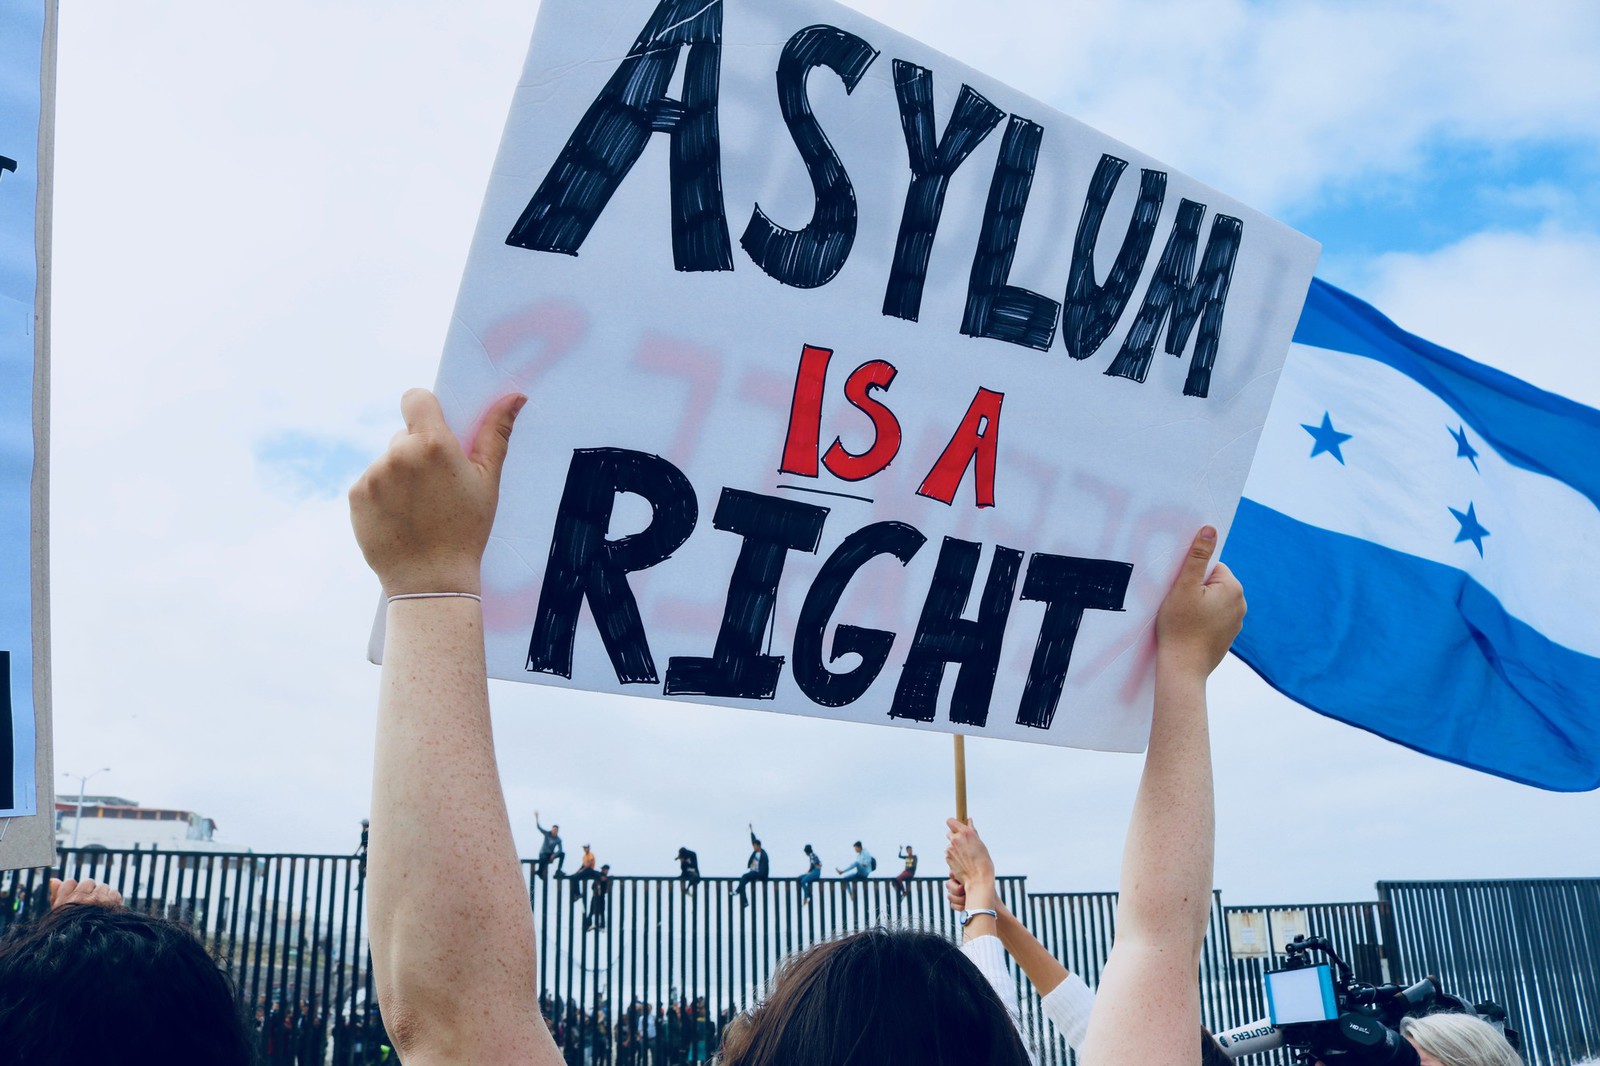 Jeff Sessions just slammed the door on thousands of asylum seekers